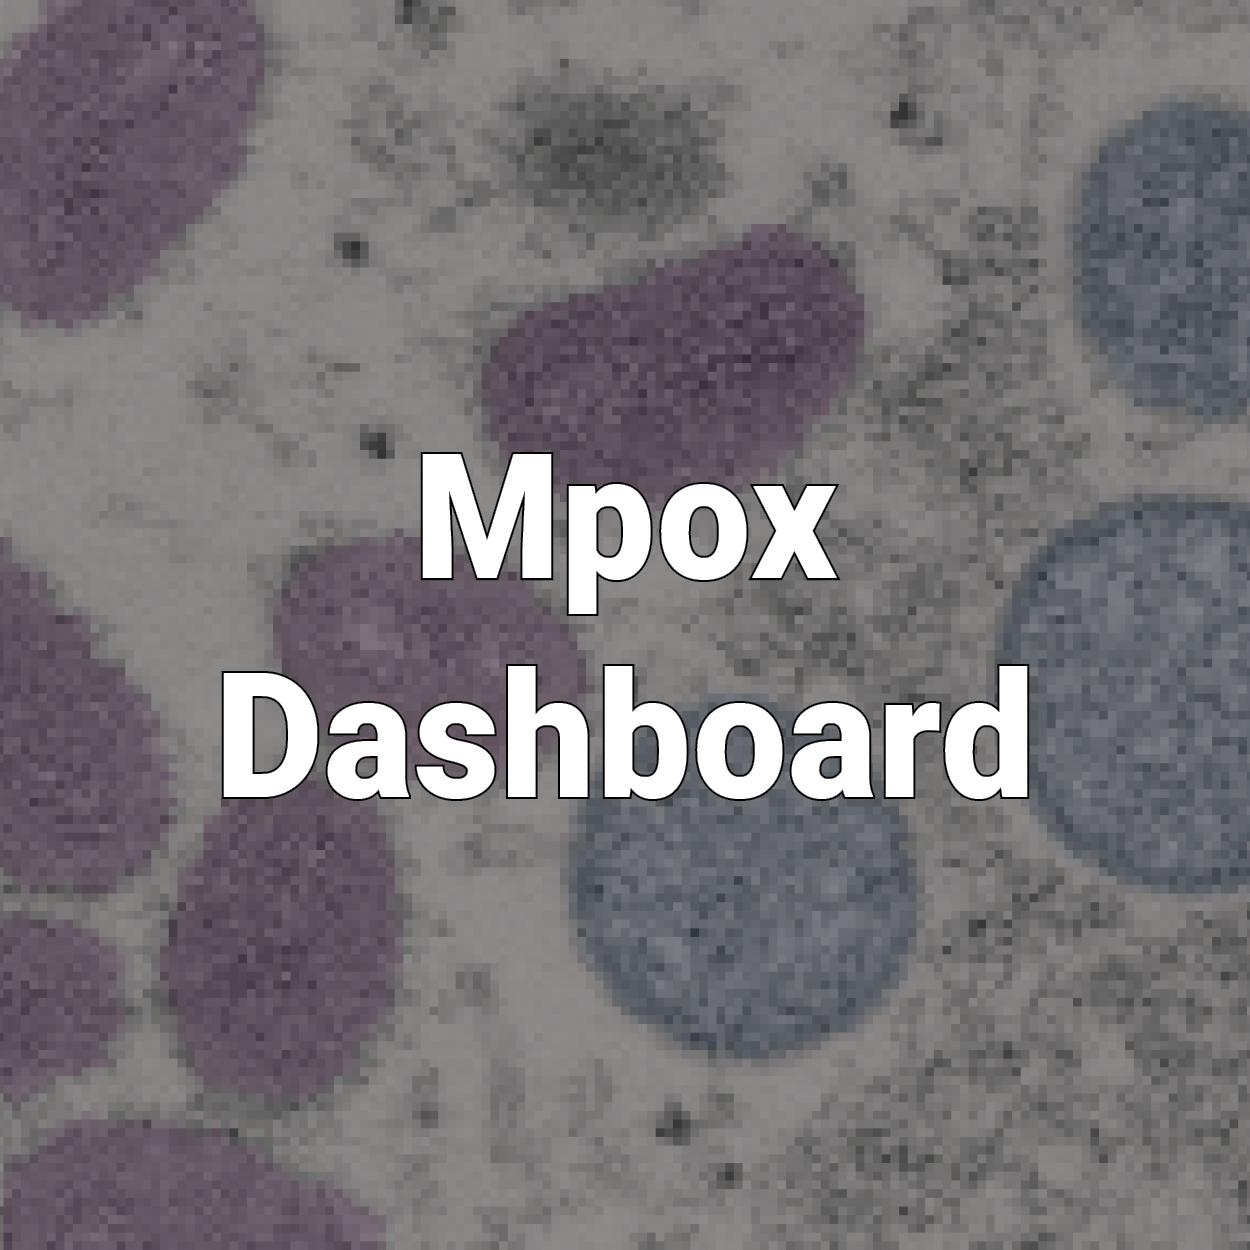 Microscopic image of mpox cells with text overlay of 